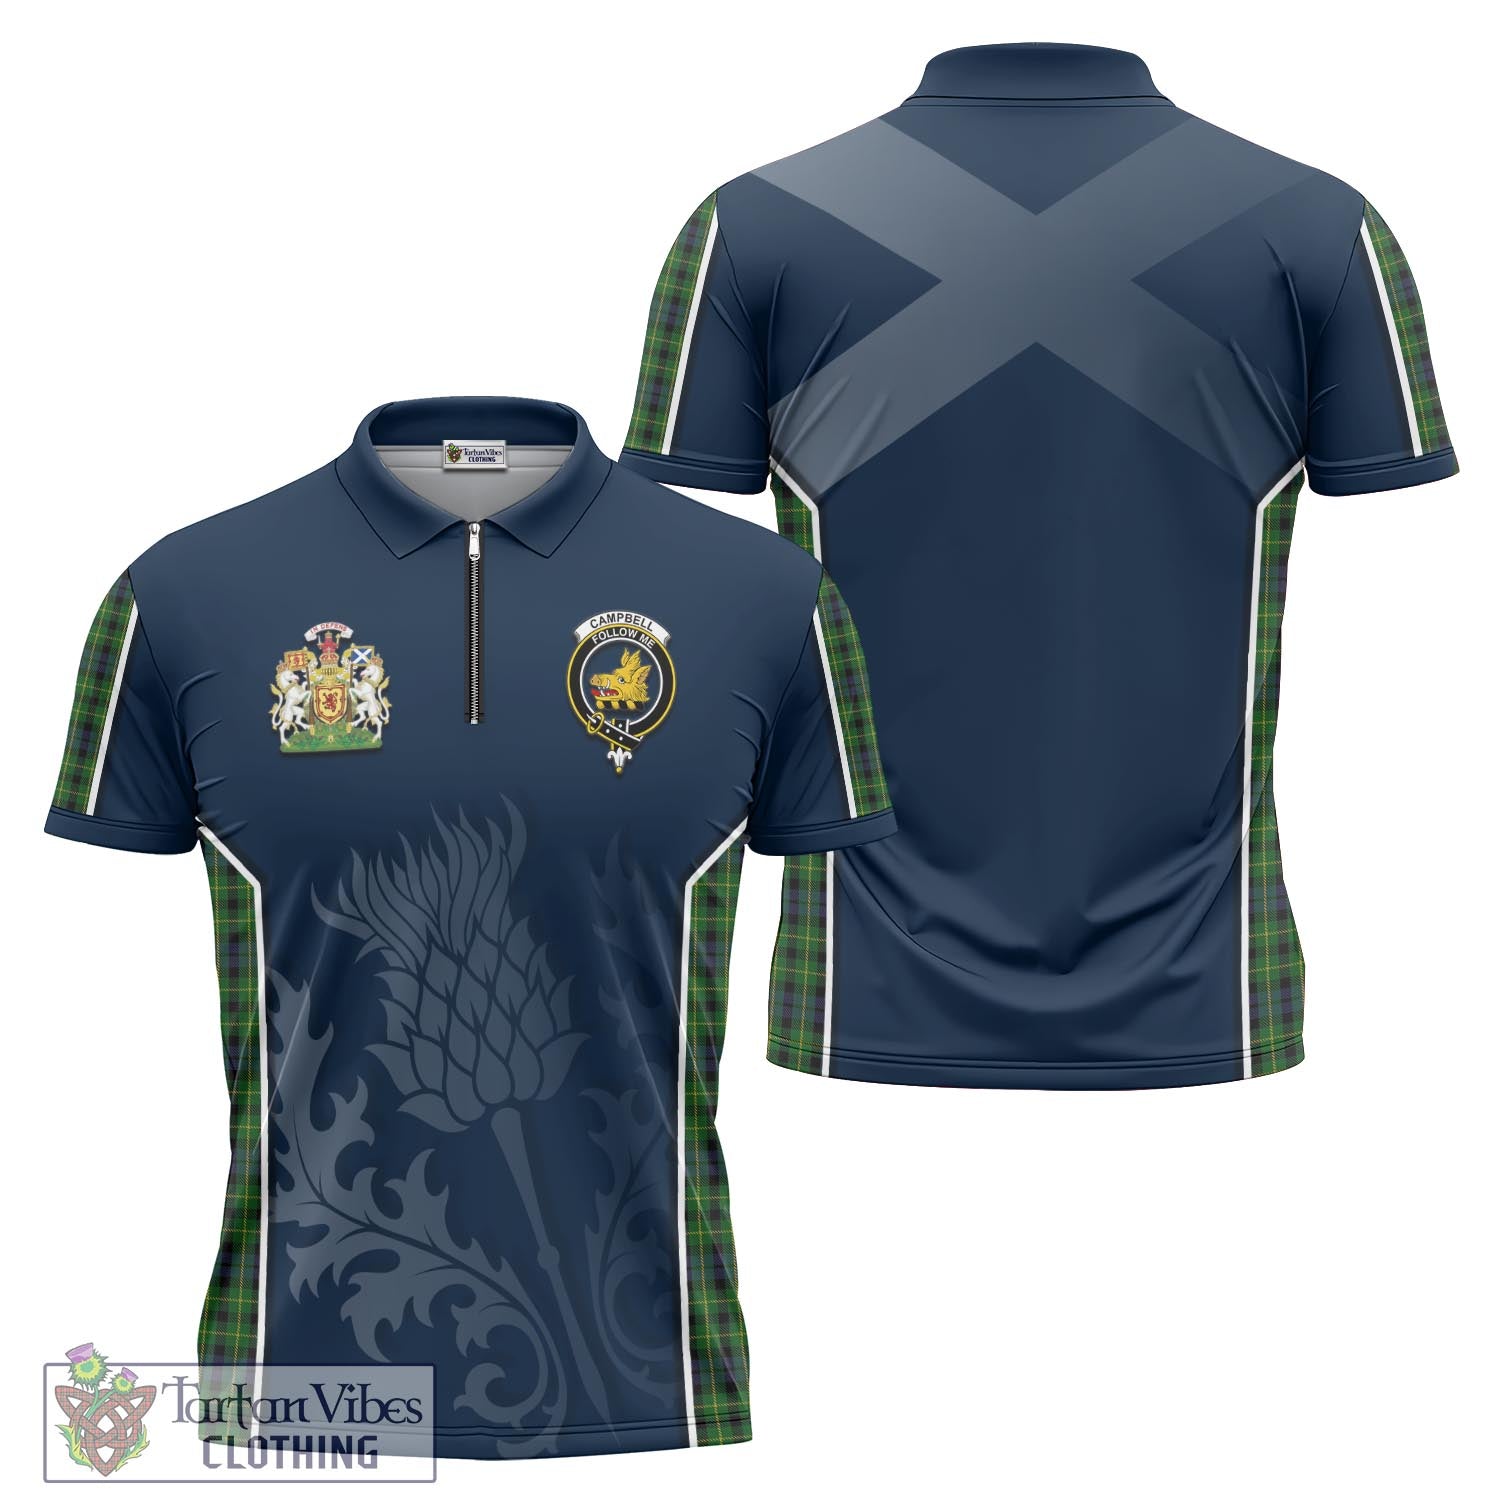 Tartan Vibes Clothing Campbell of Breadalbane Tartan Zipper Polo Shirt with Family Crest and Scottish Thistle Vibes Sport Style